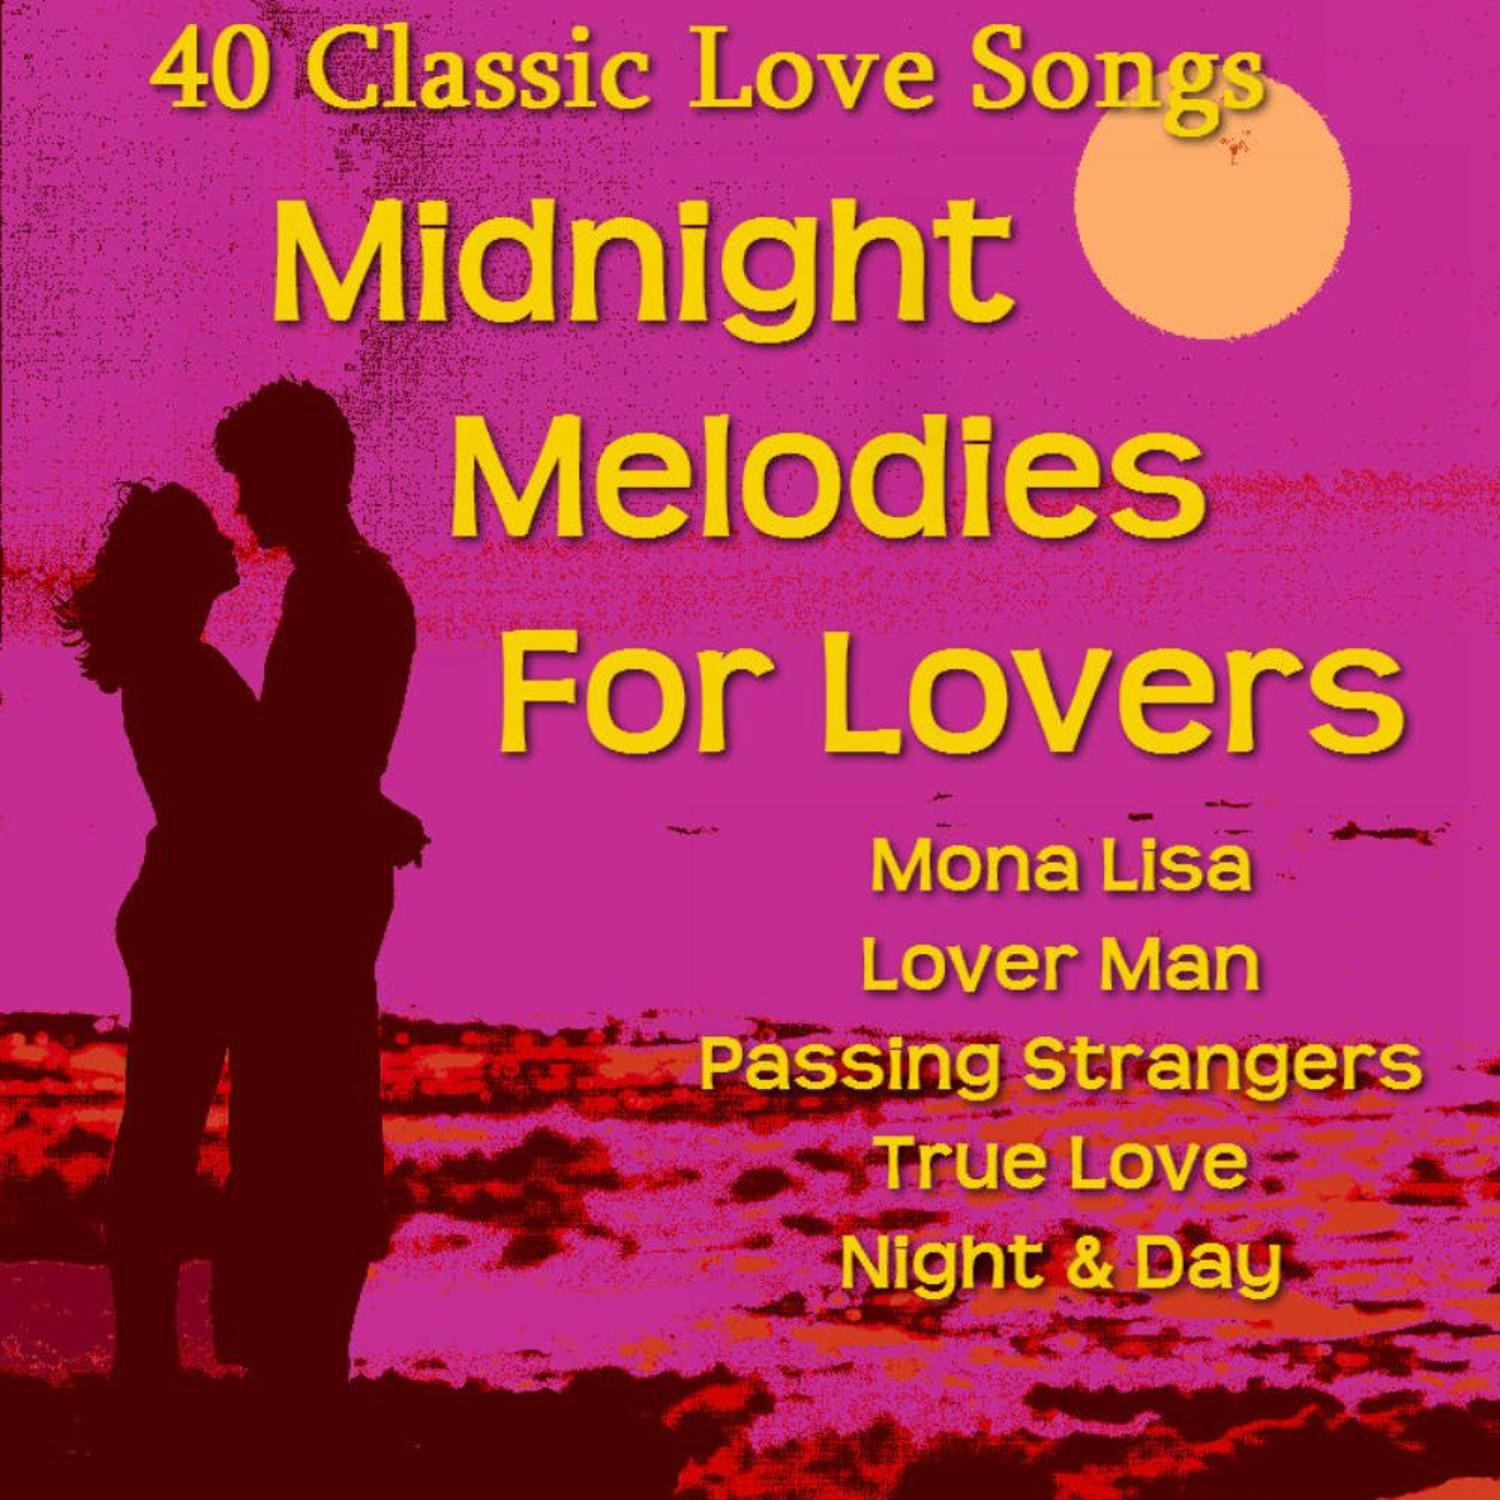 Midnight Melodies For Lovers